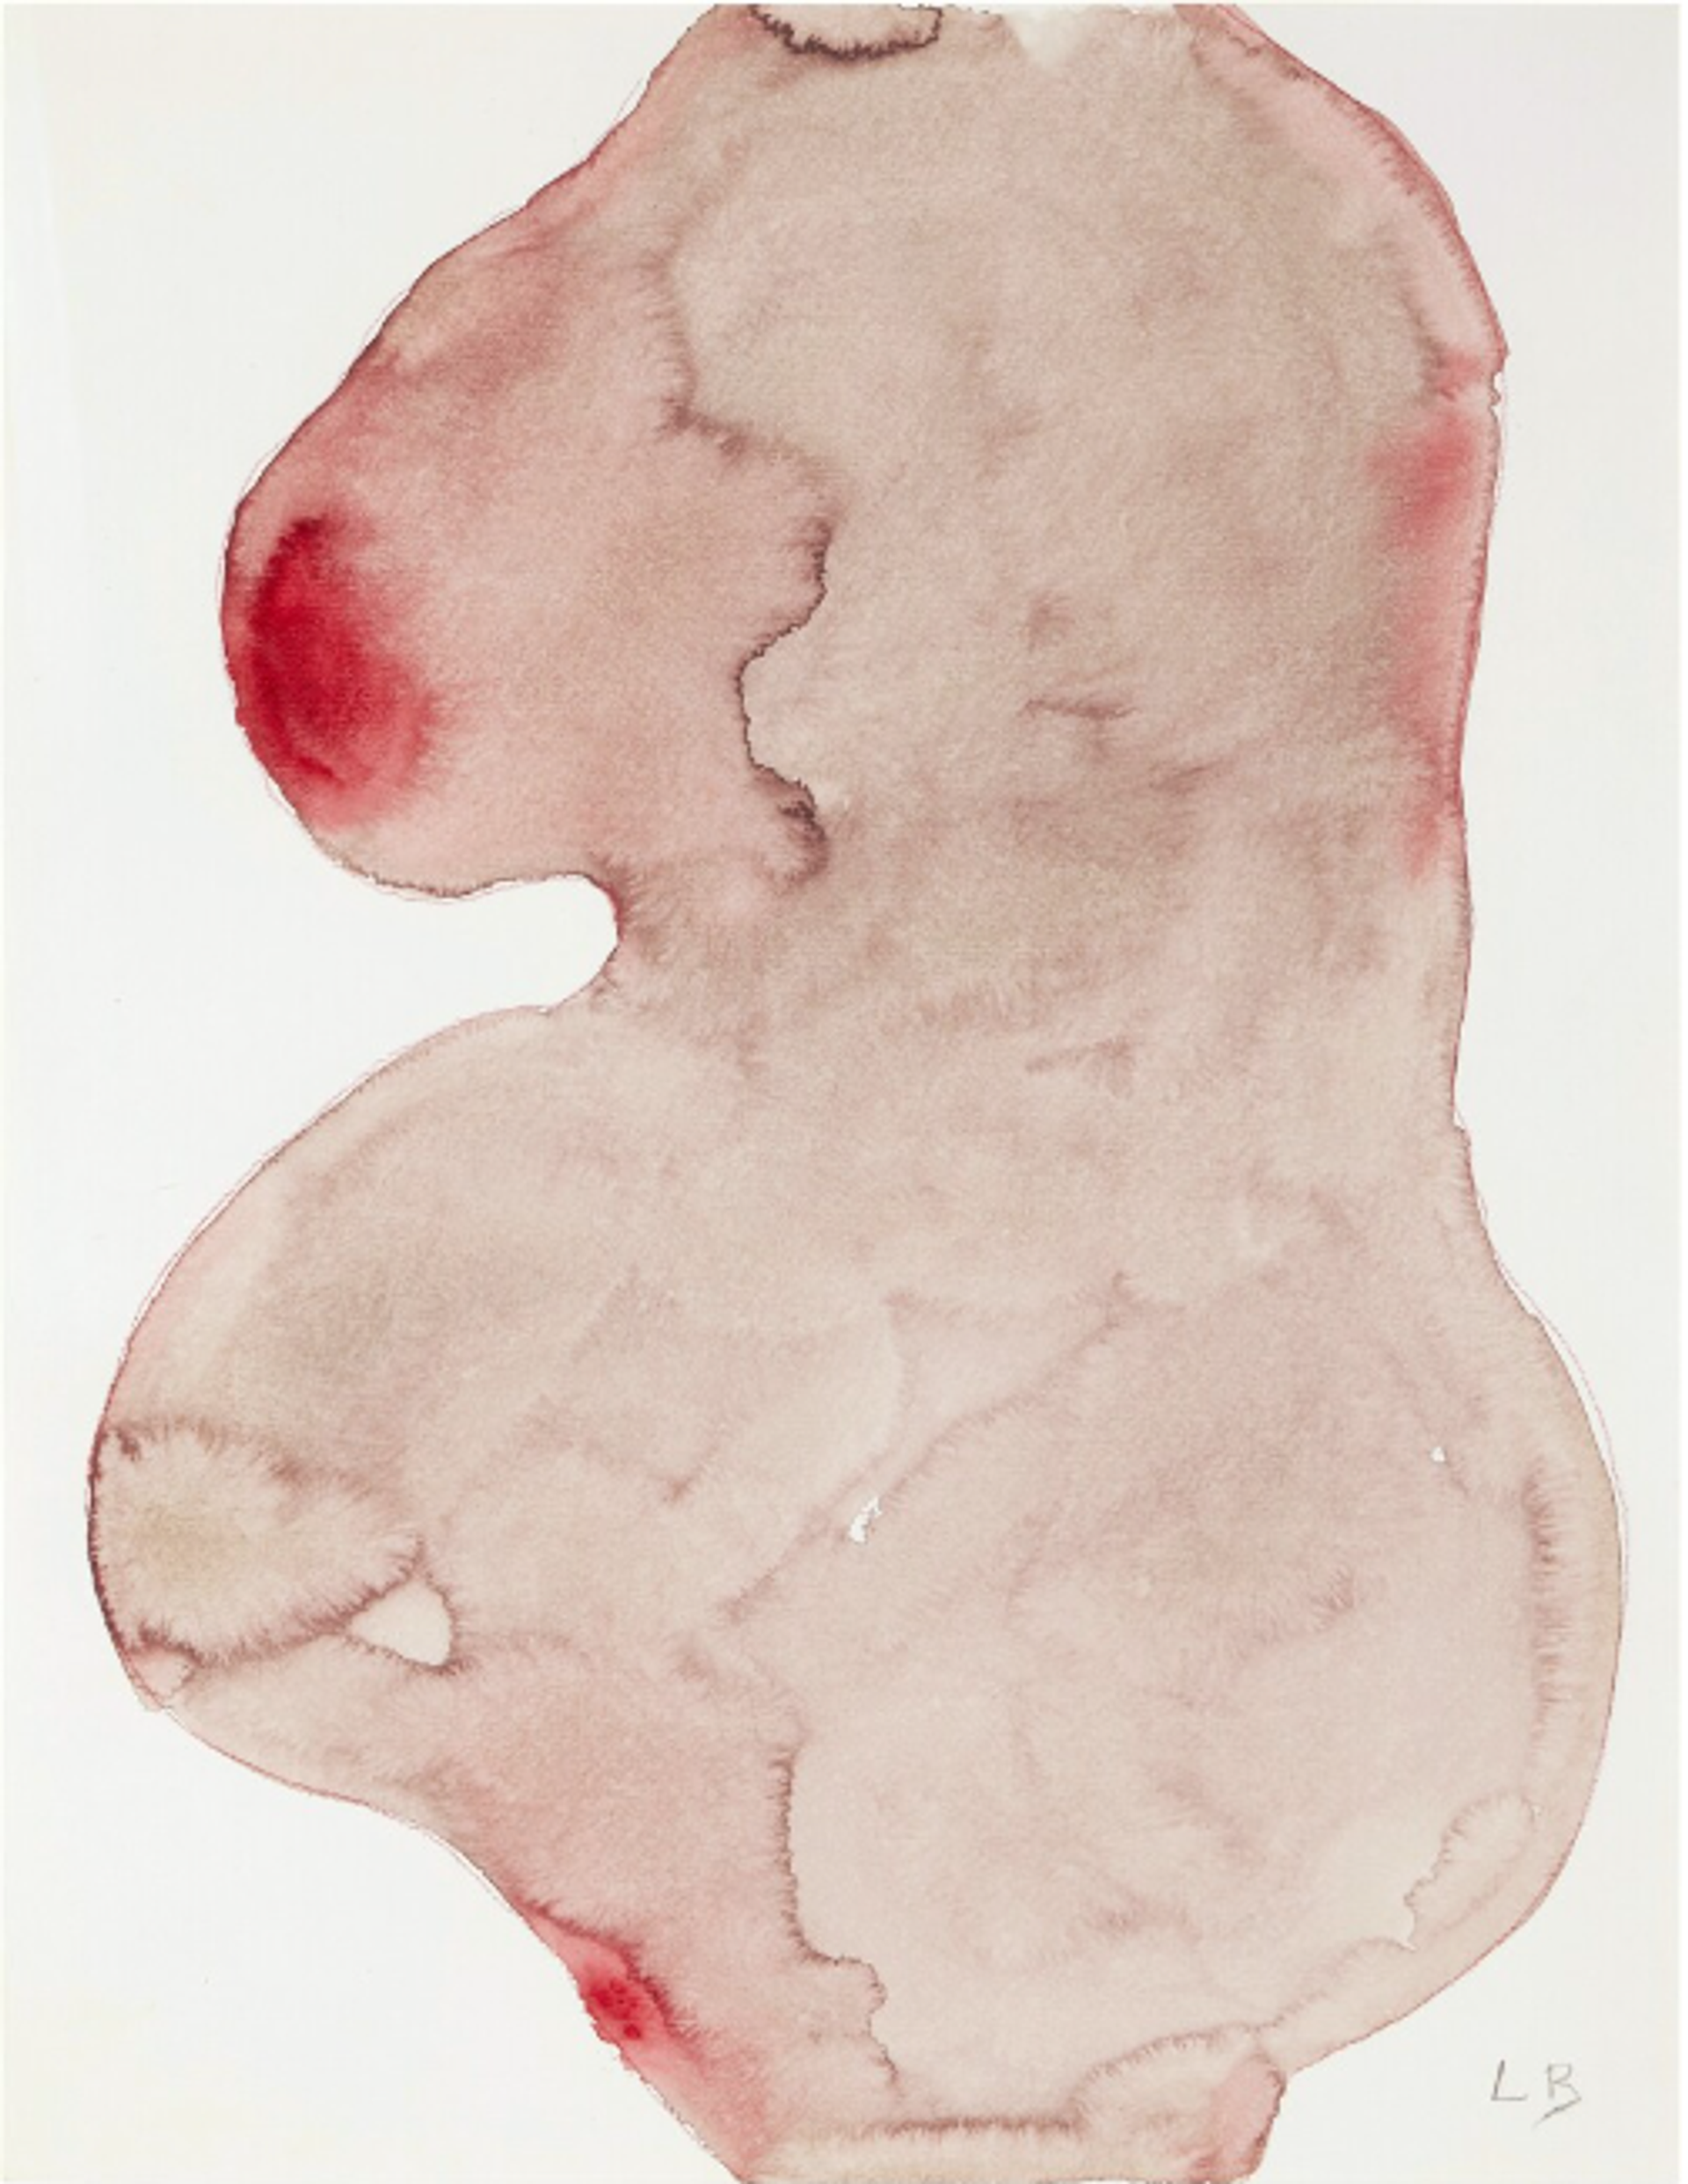 Pregnant Woman by Louise Bourgeois - Sotheby's 